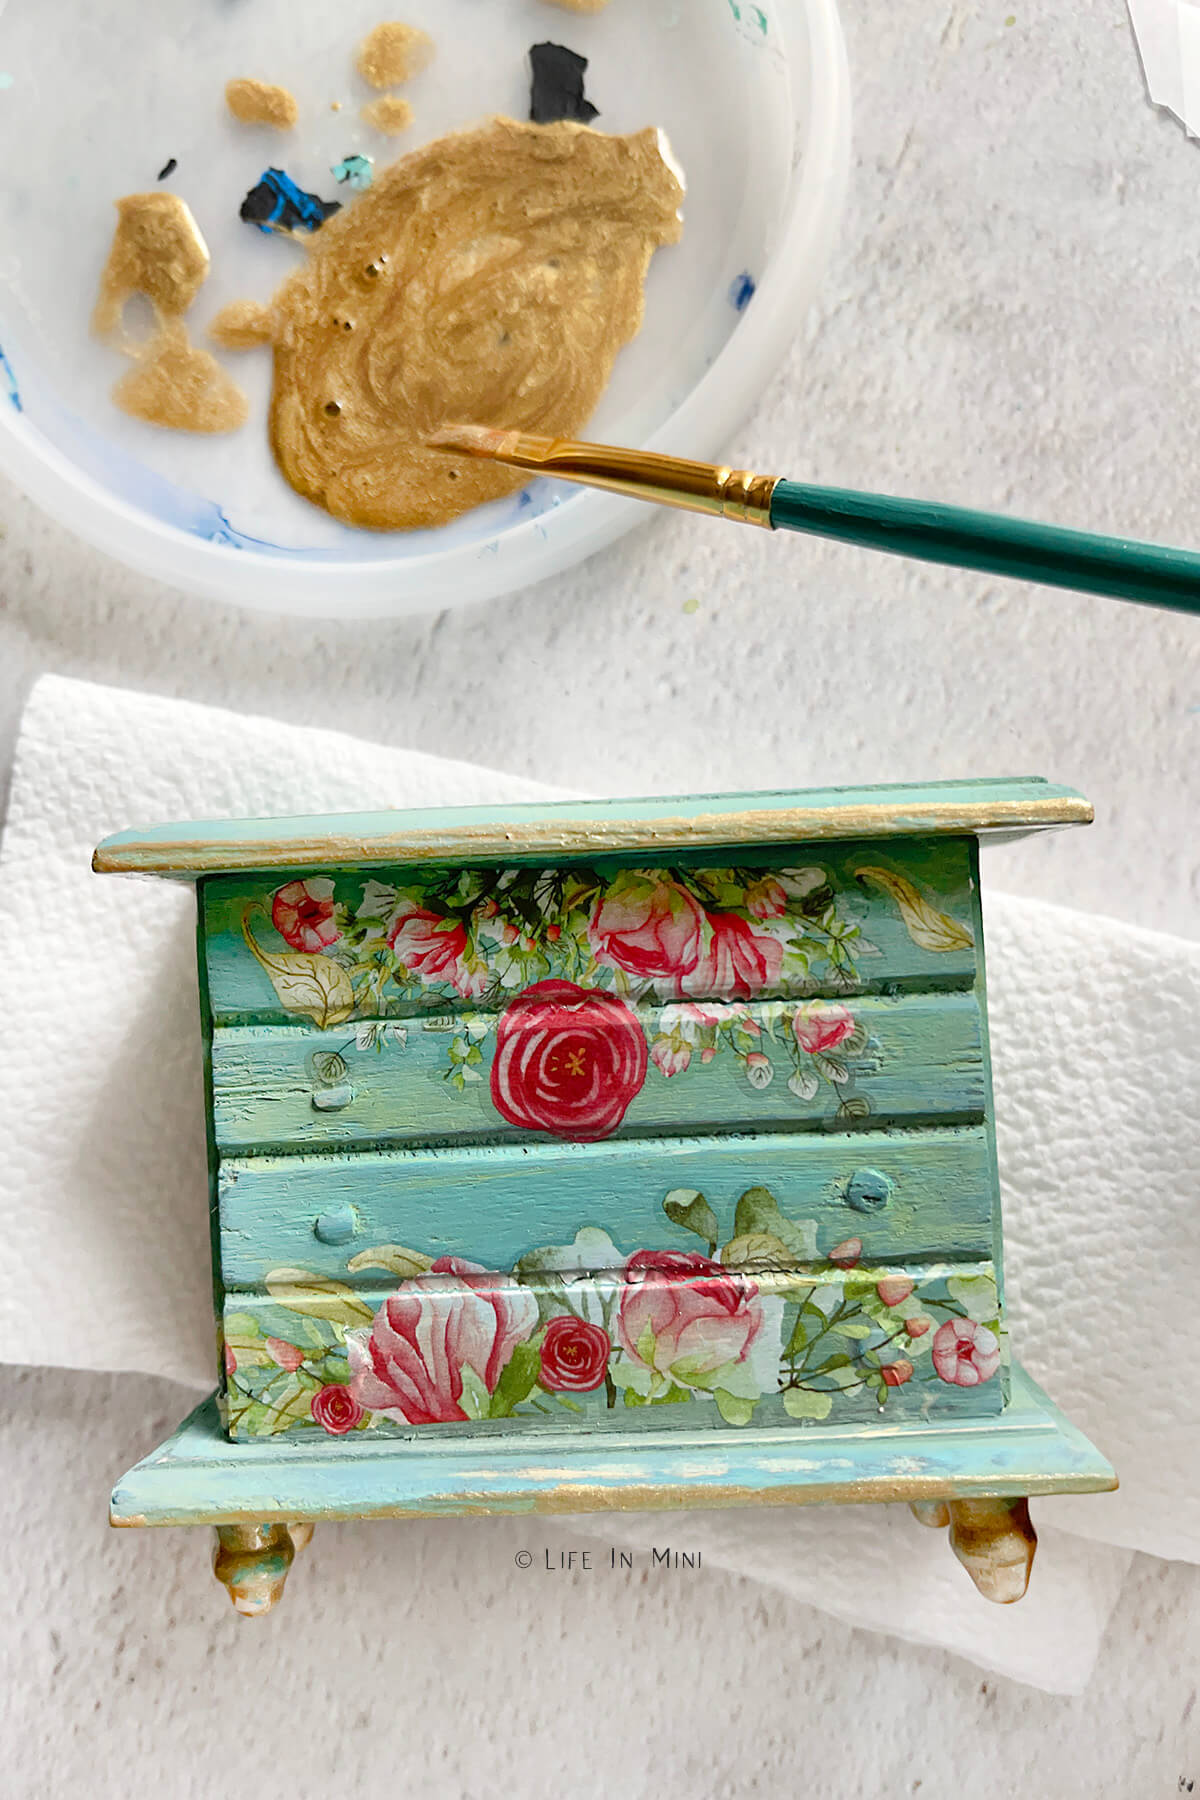 Painting gold trim over a teal dollhouse dresser with floral prints